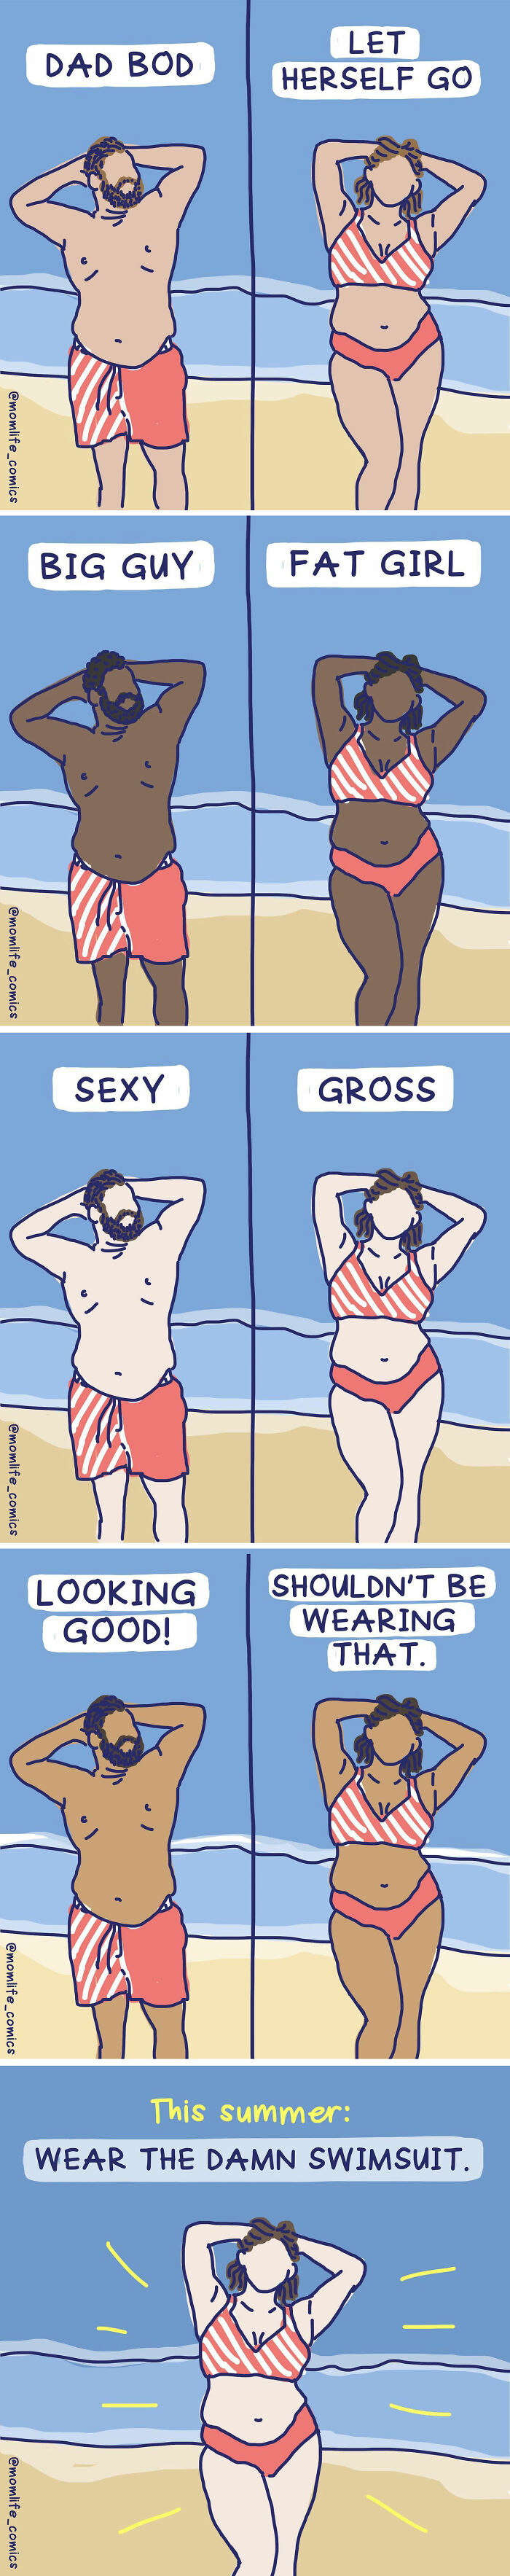 A Comic About Different Views On Men's And Women's Bodies